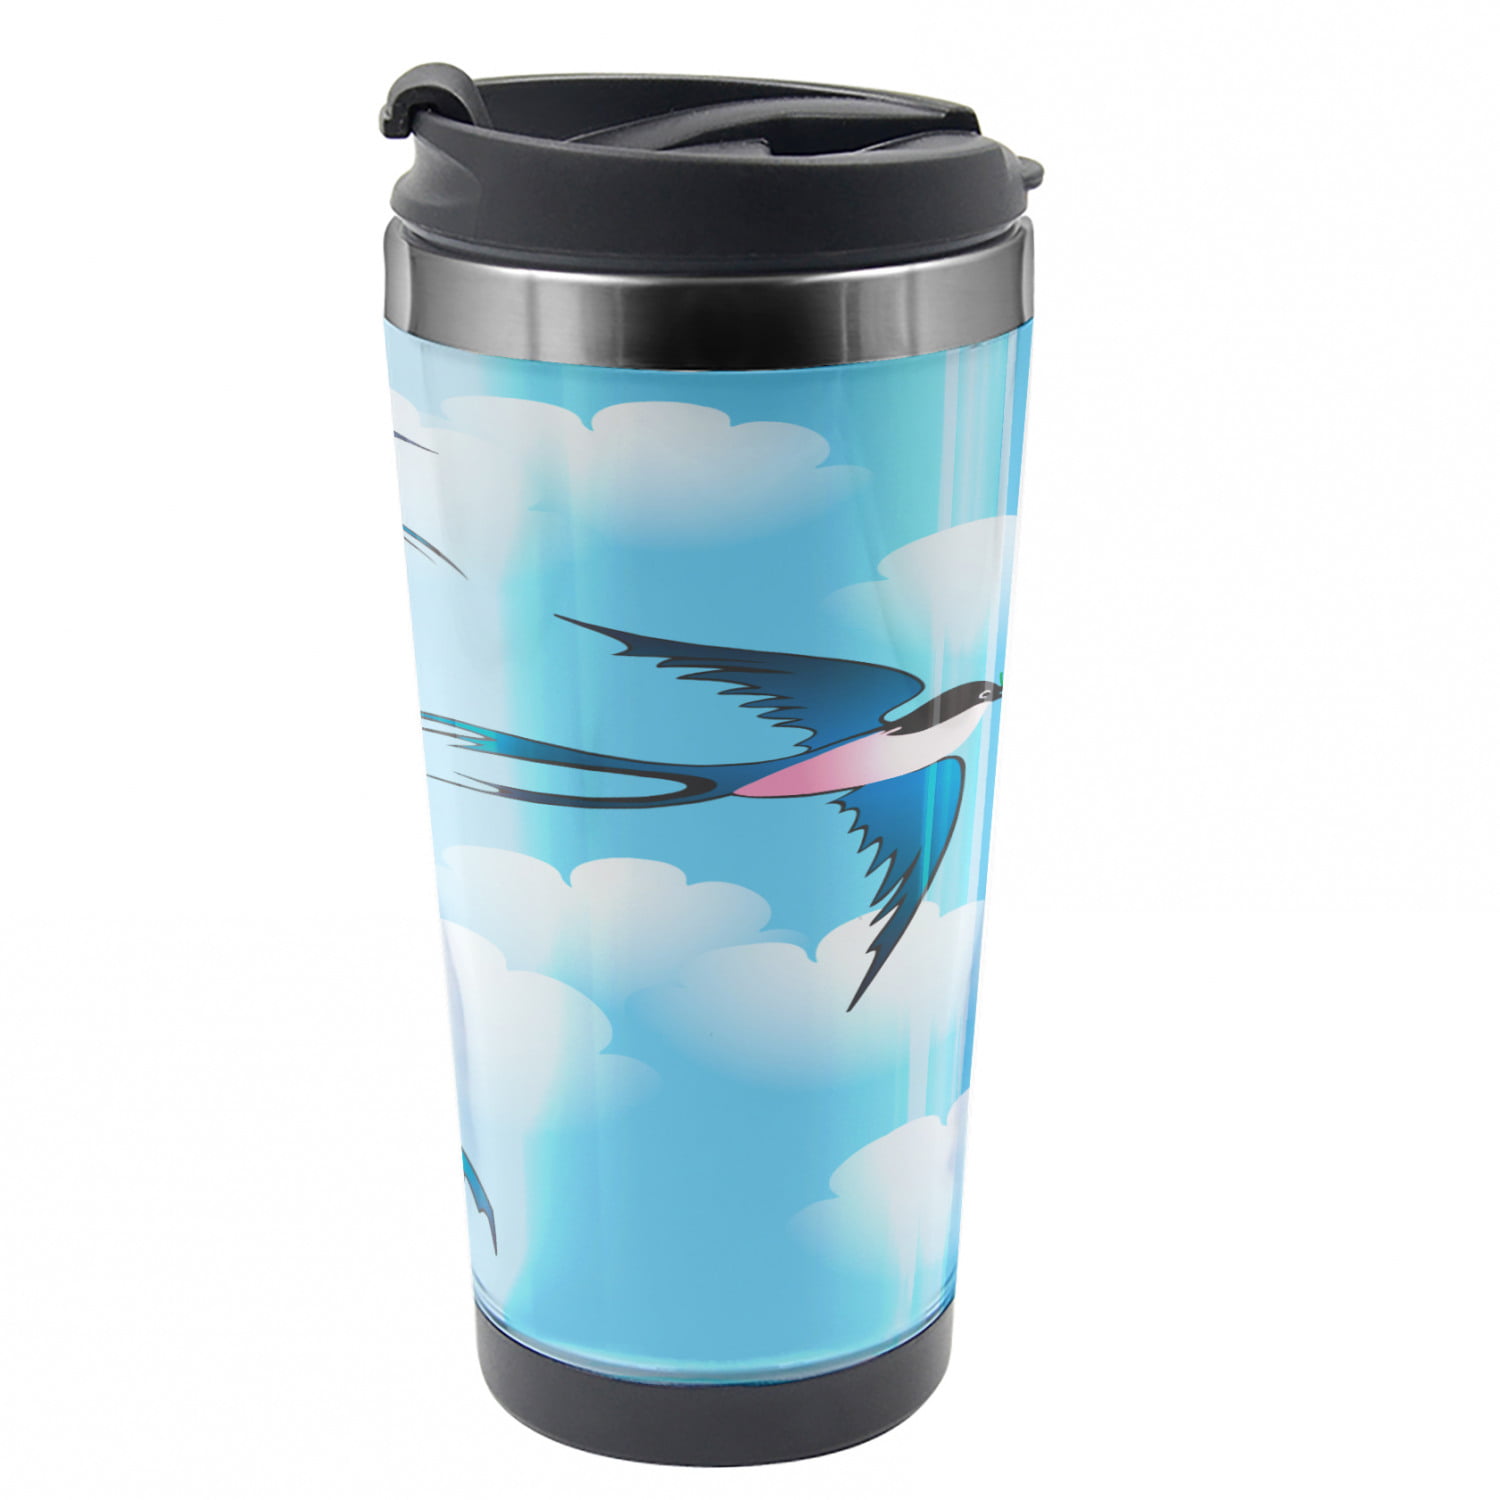 16 oz Silver Stainless Steel Travel Mug Details about   New 